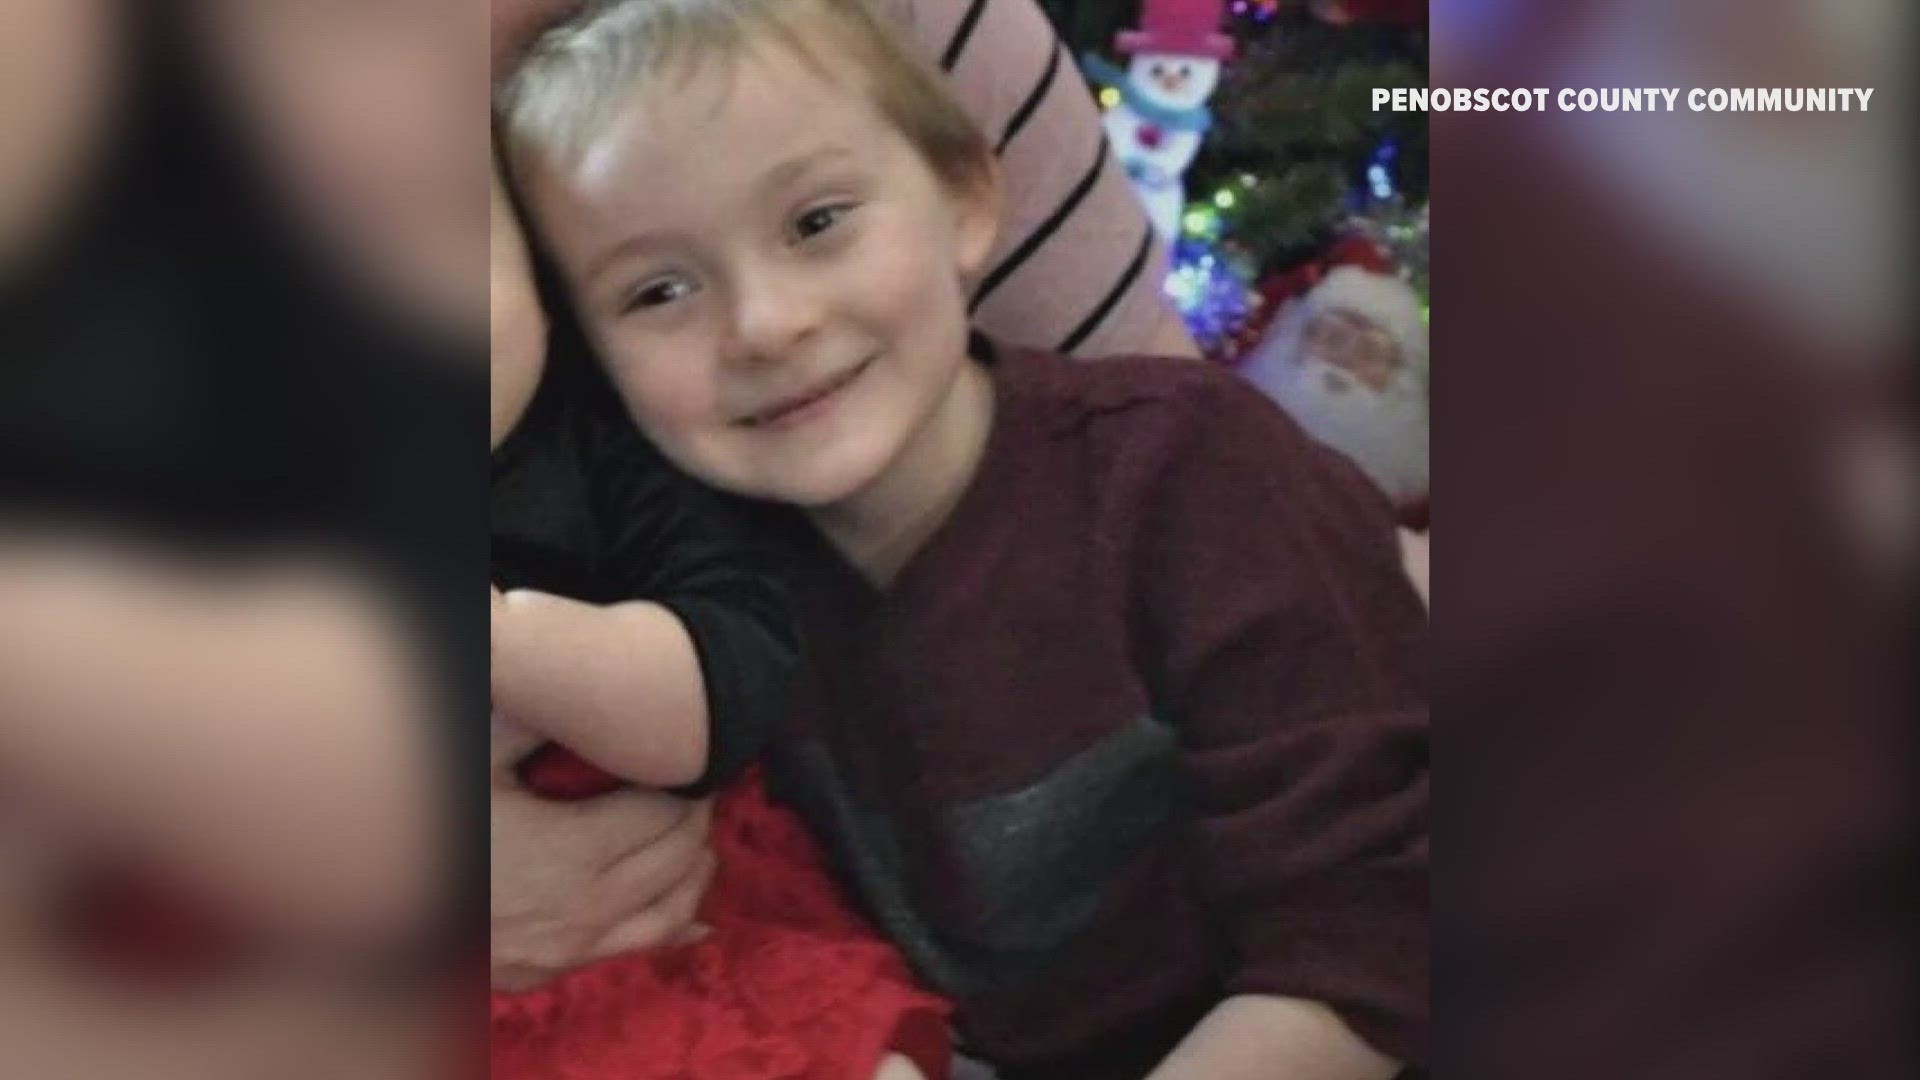 The boy's parents and a grandparent have been charged with depraved indifference murder in connection with his death.